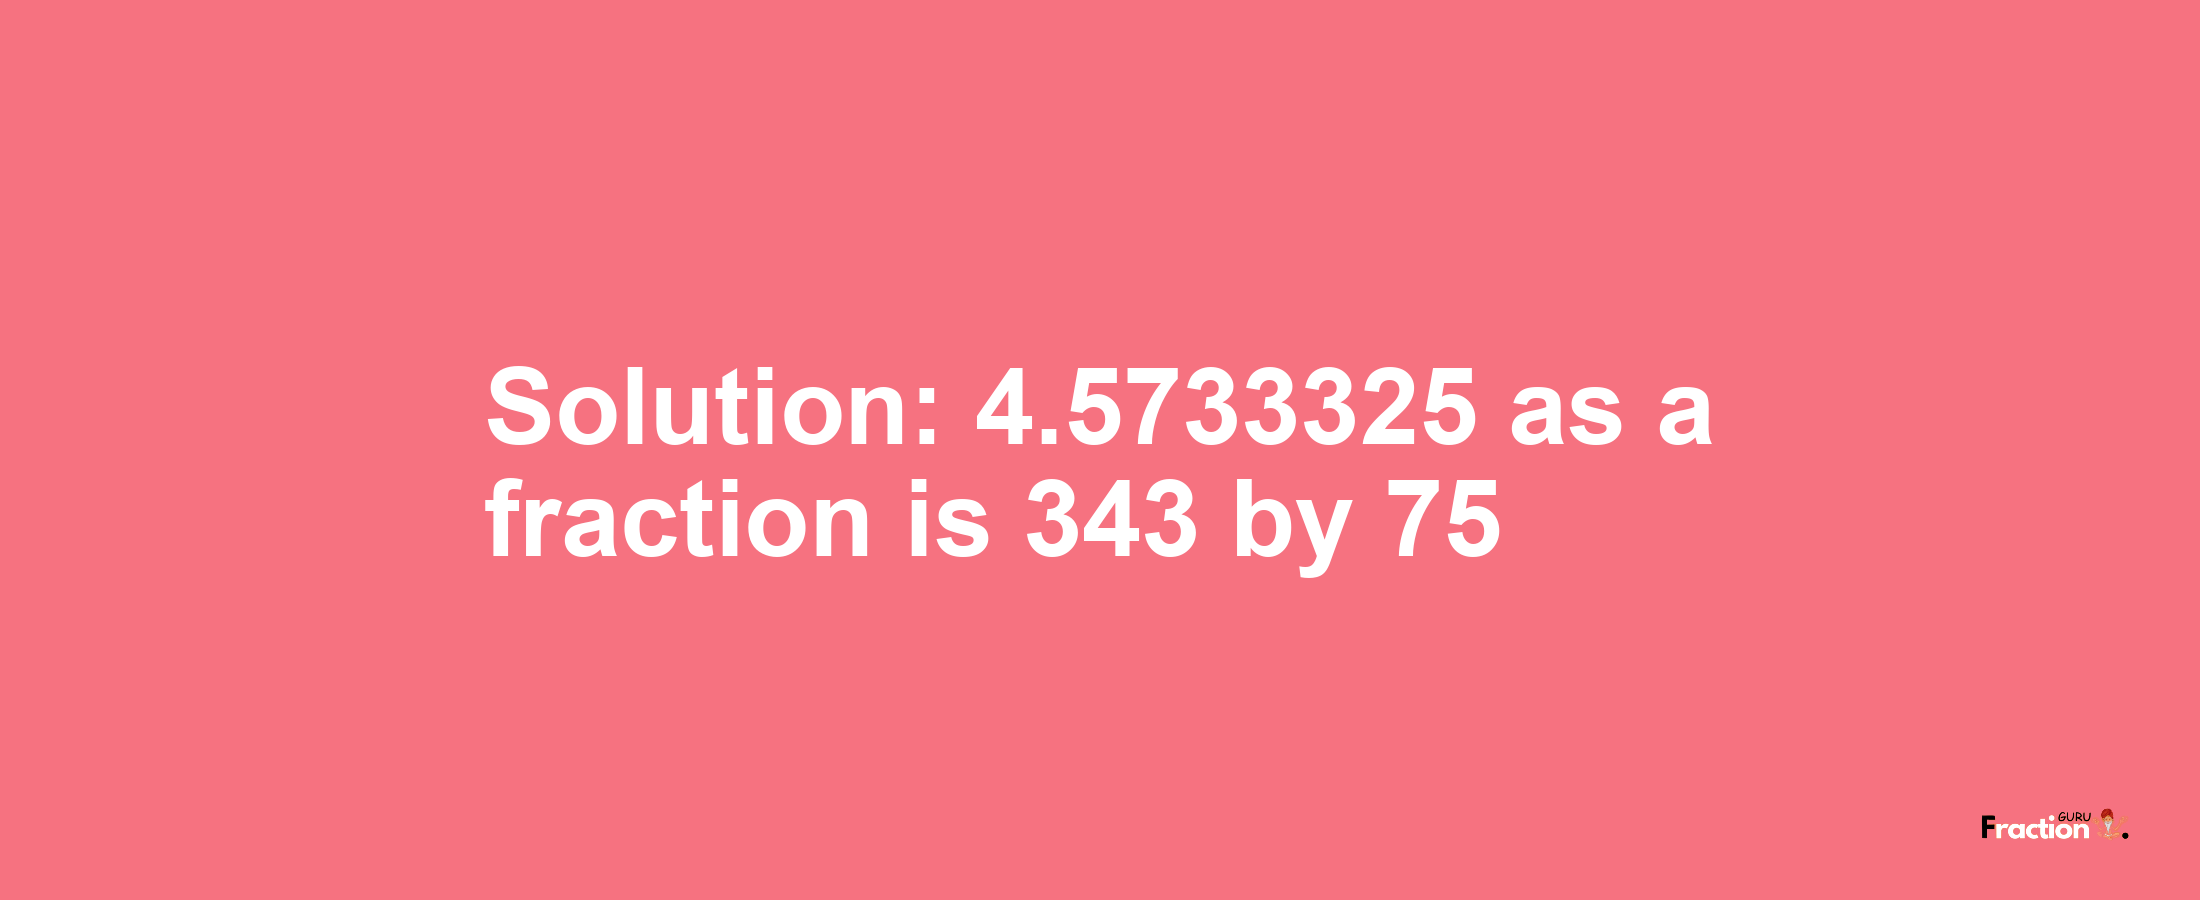 Solution:4.5733325 as a fraction is 343/75